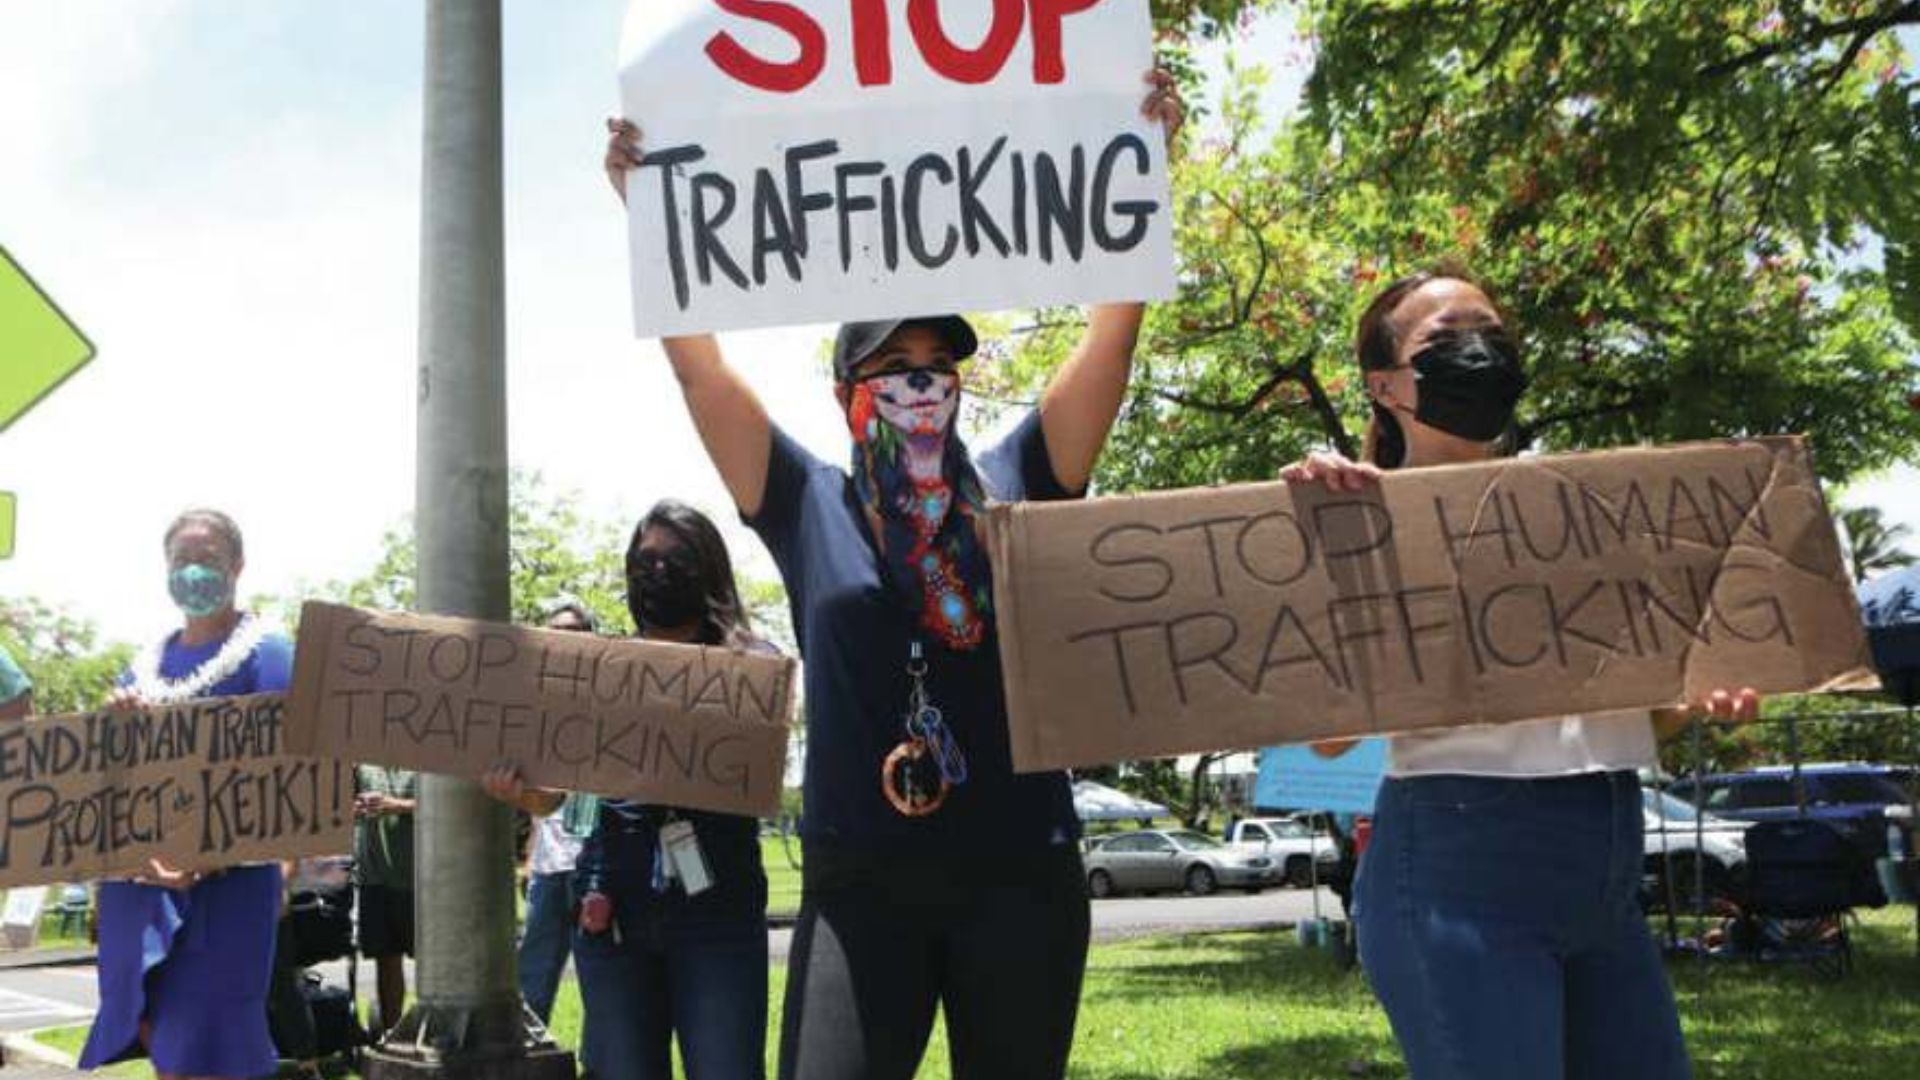 young people protesting showing youth engagement in anti-human trafficking activism